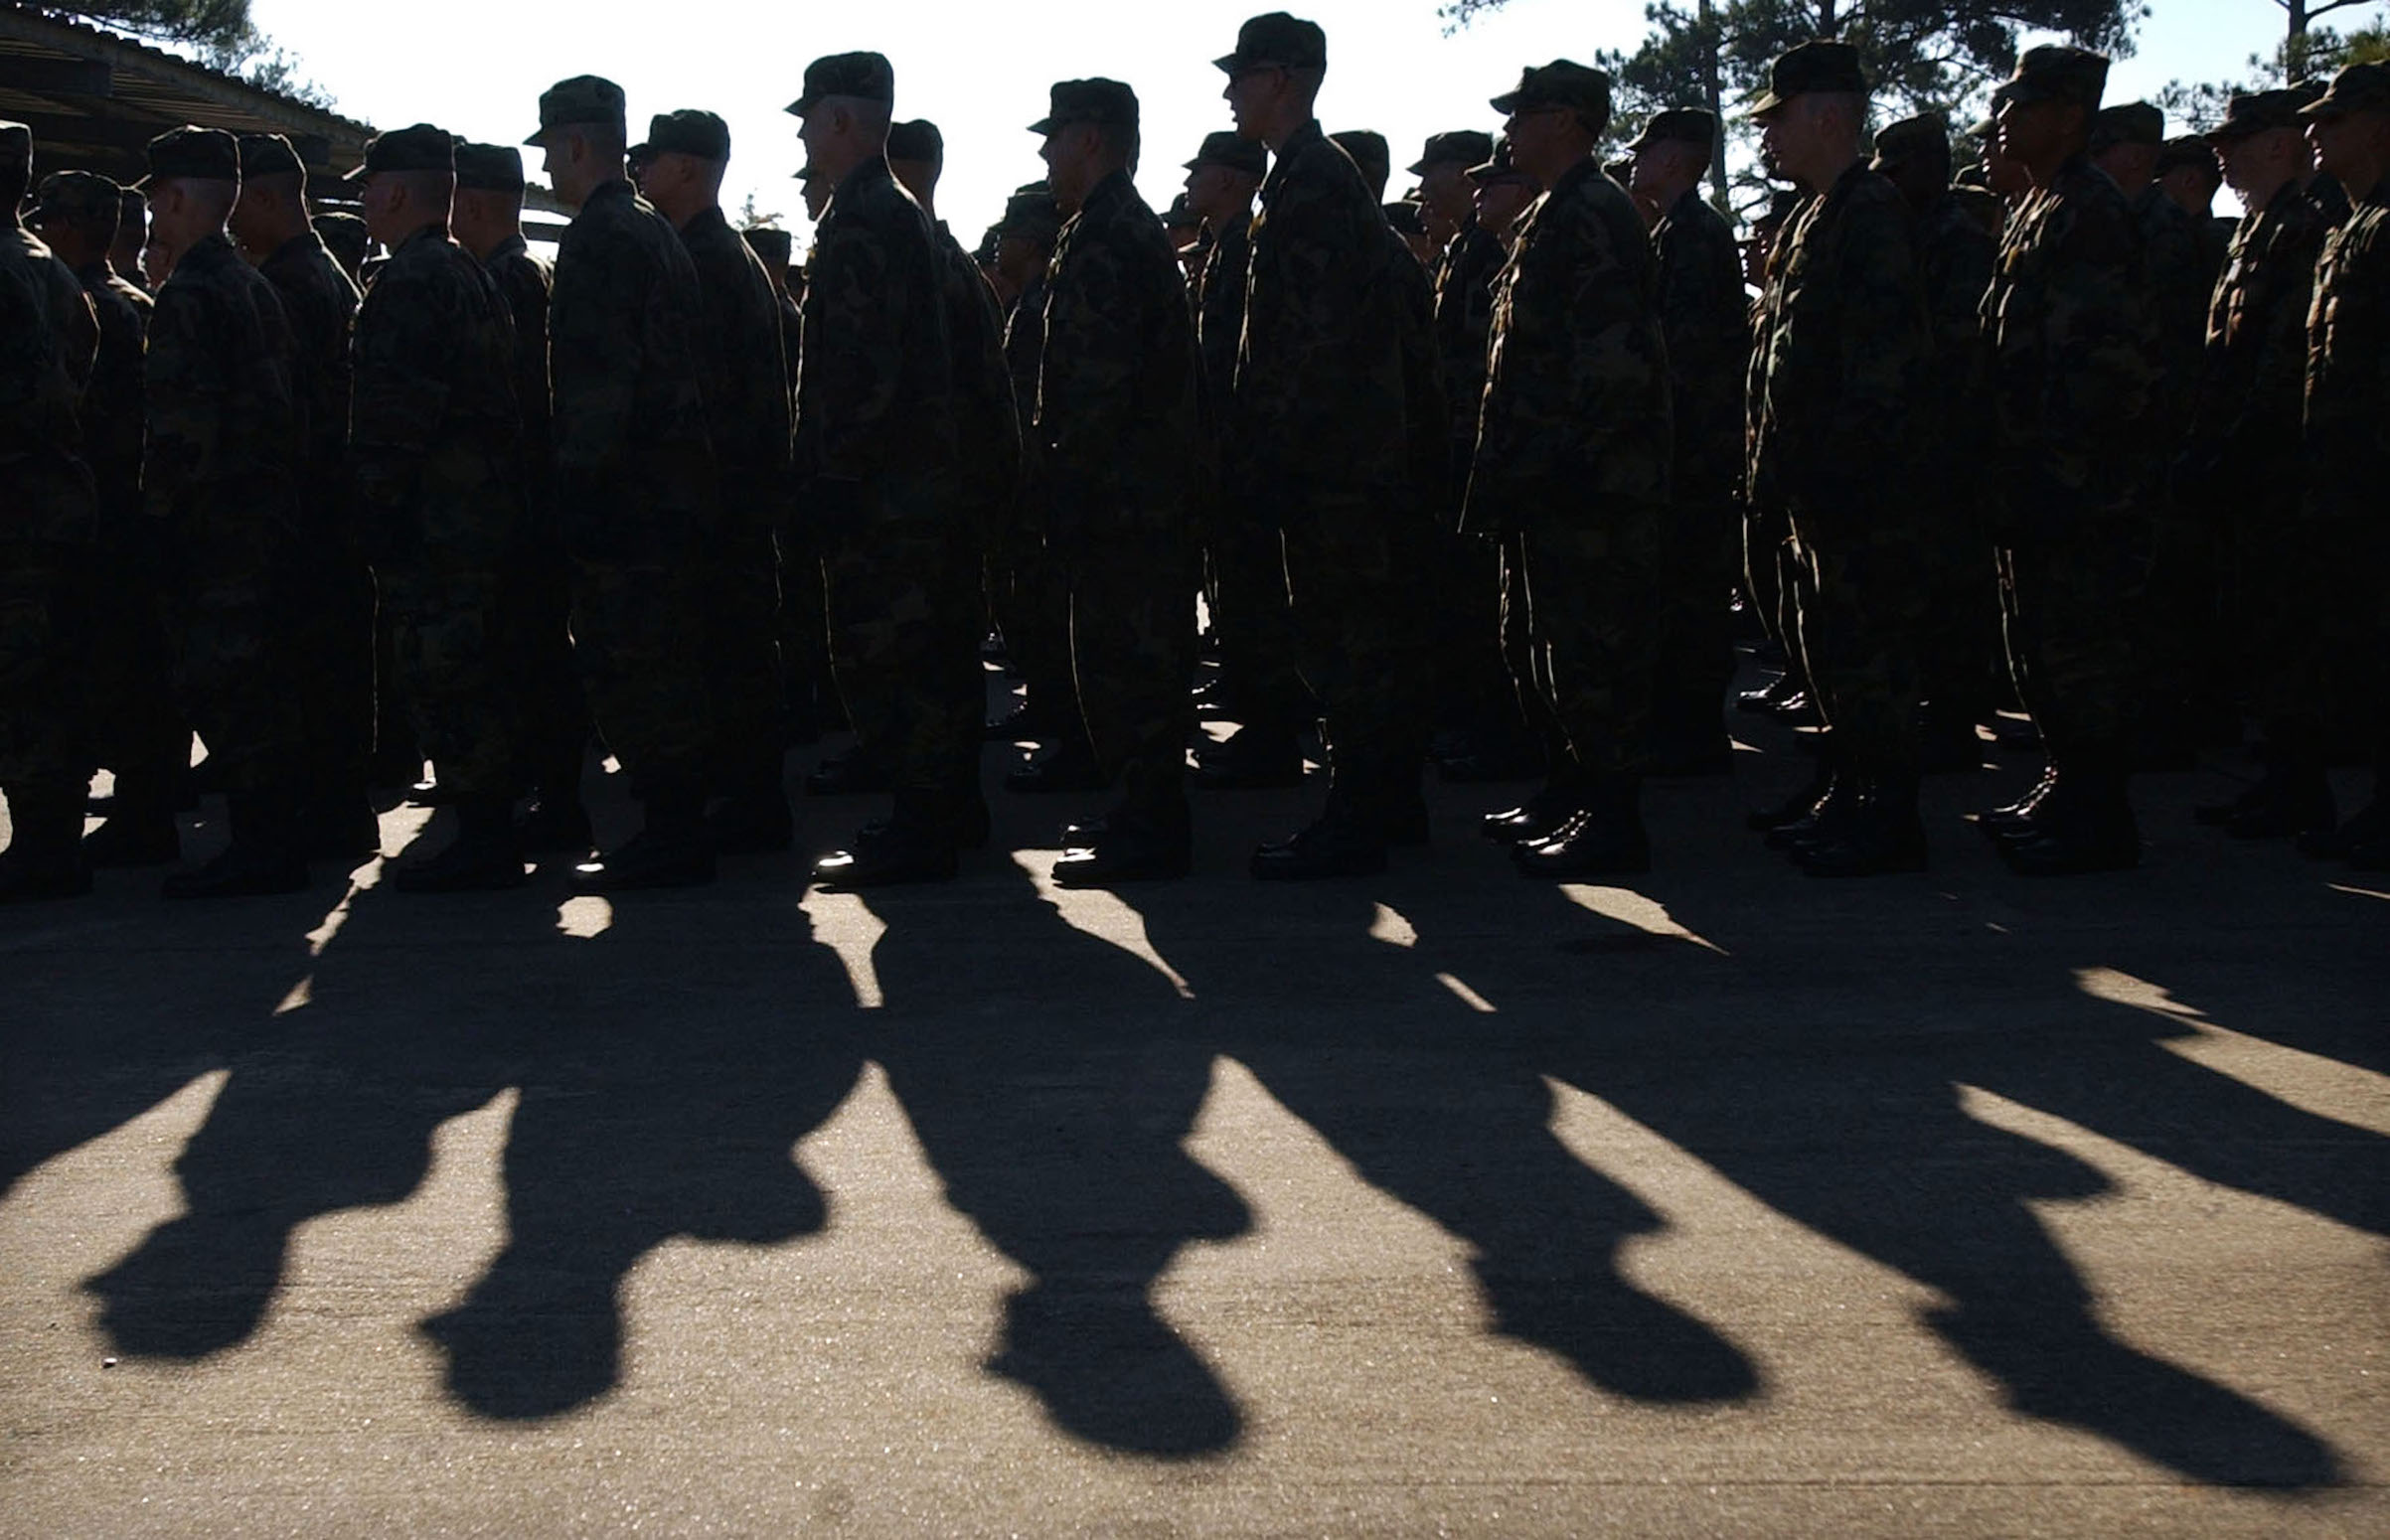 U.S. Soldiers with Delta Company line up to take part in morning team development exercises Nov. 7, 2002 in Fort Benning, Ga. Over 24,000 soldiers every year go through U.S. Army basic training at Fort Benning. (Barry Williams—Getty Images)